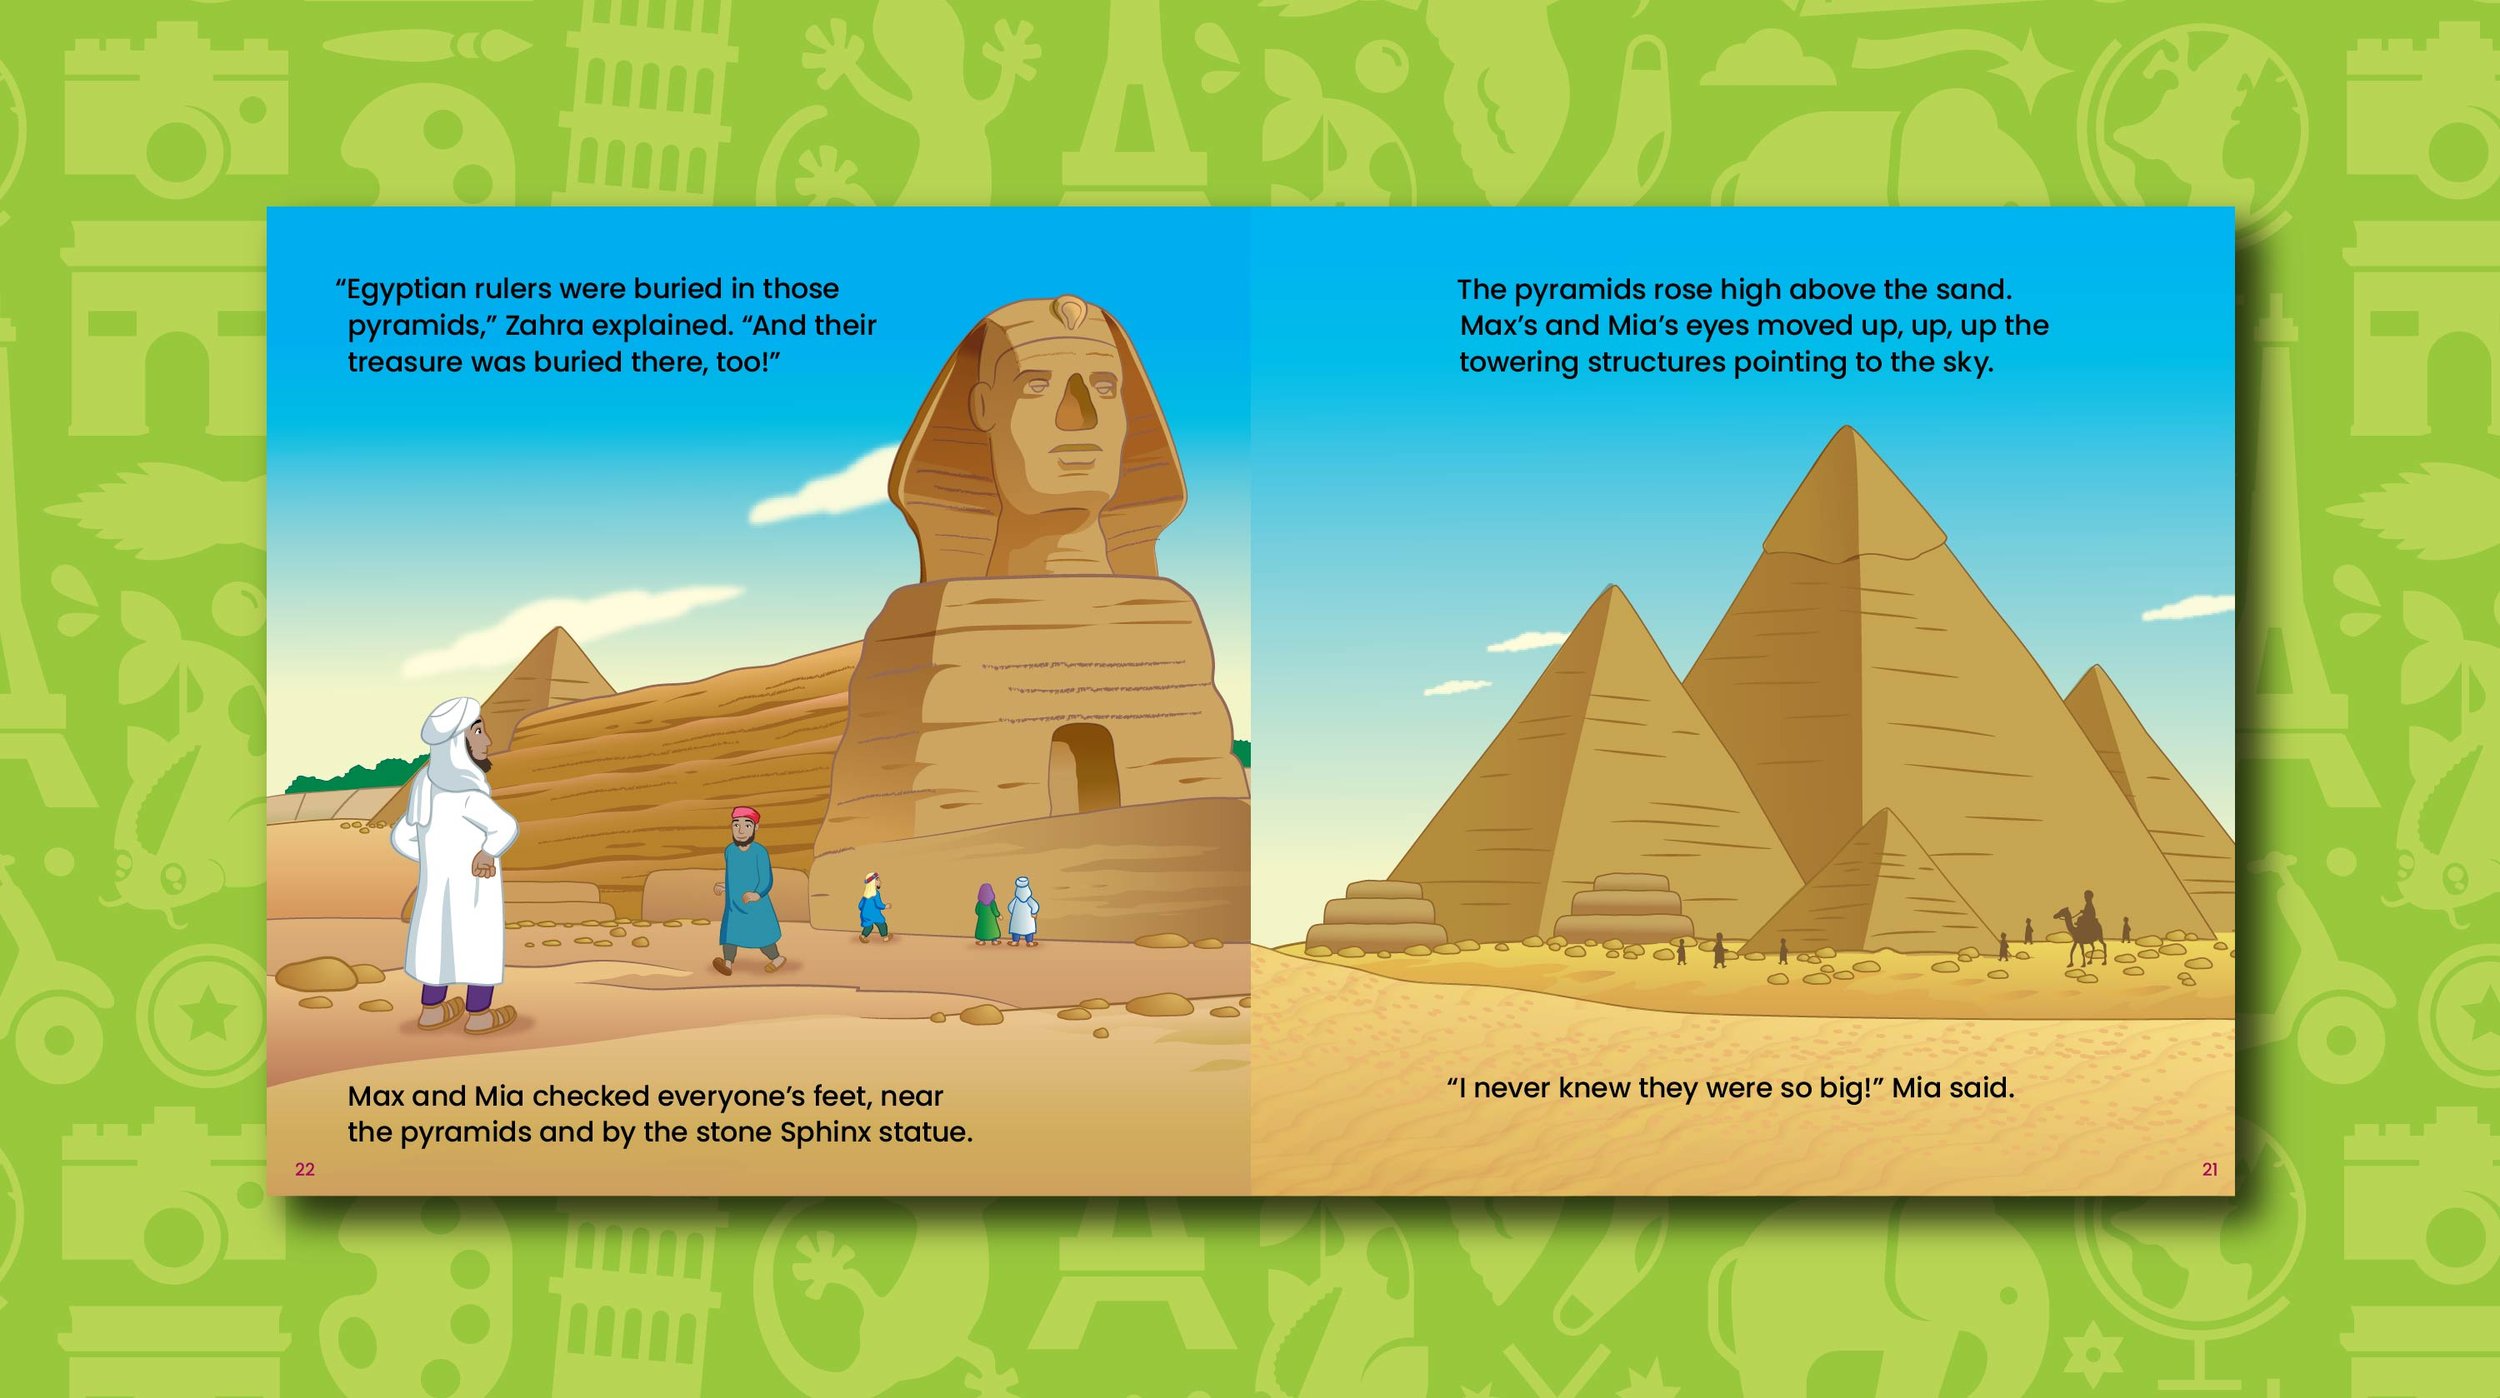 13_Surprise in the Sand - Pyramids.jpg